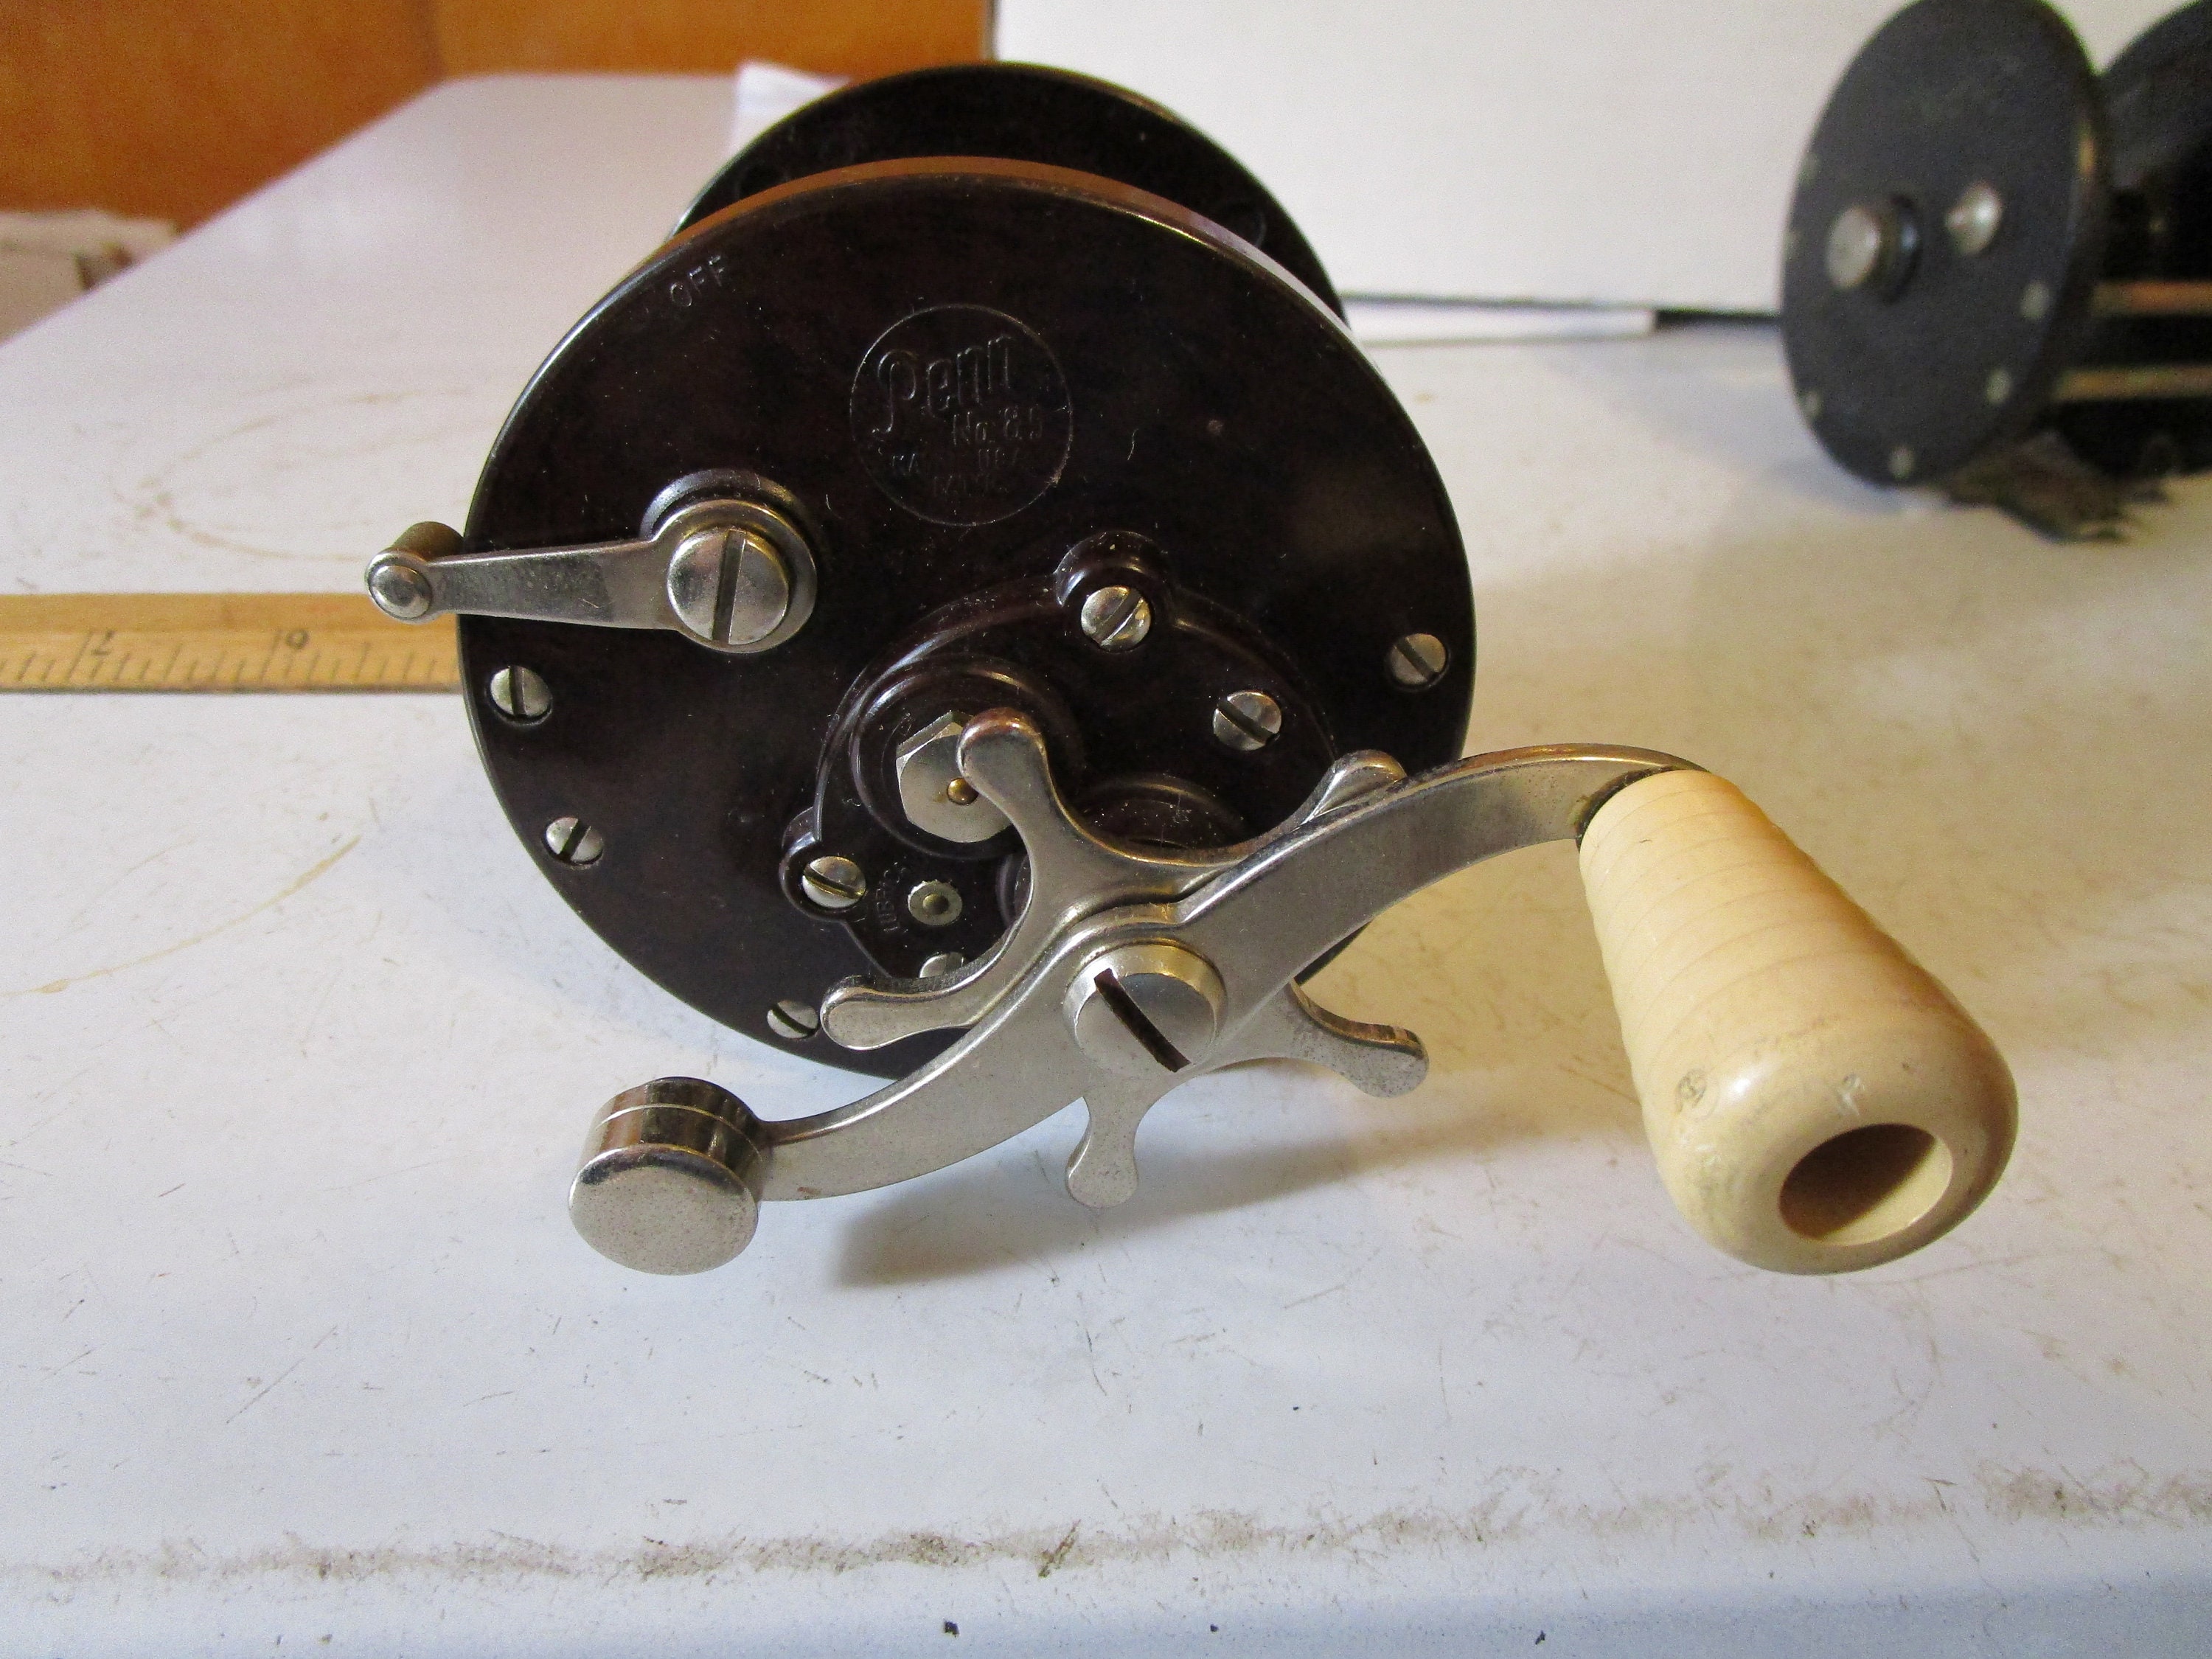 Sold at Auction: 2x Vintage Penn Big Game Sea Fishing Reels – Penn Senator  112 3/0 Game Fish Reel and Penn No149 with